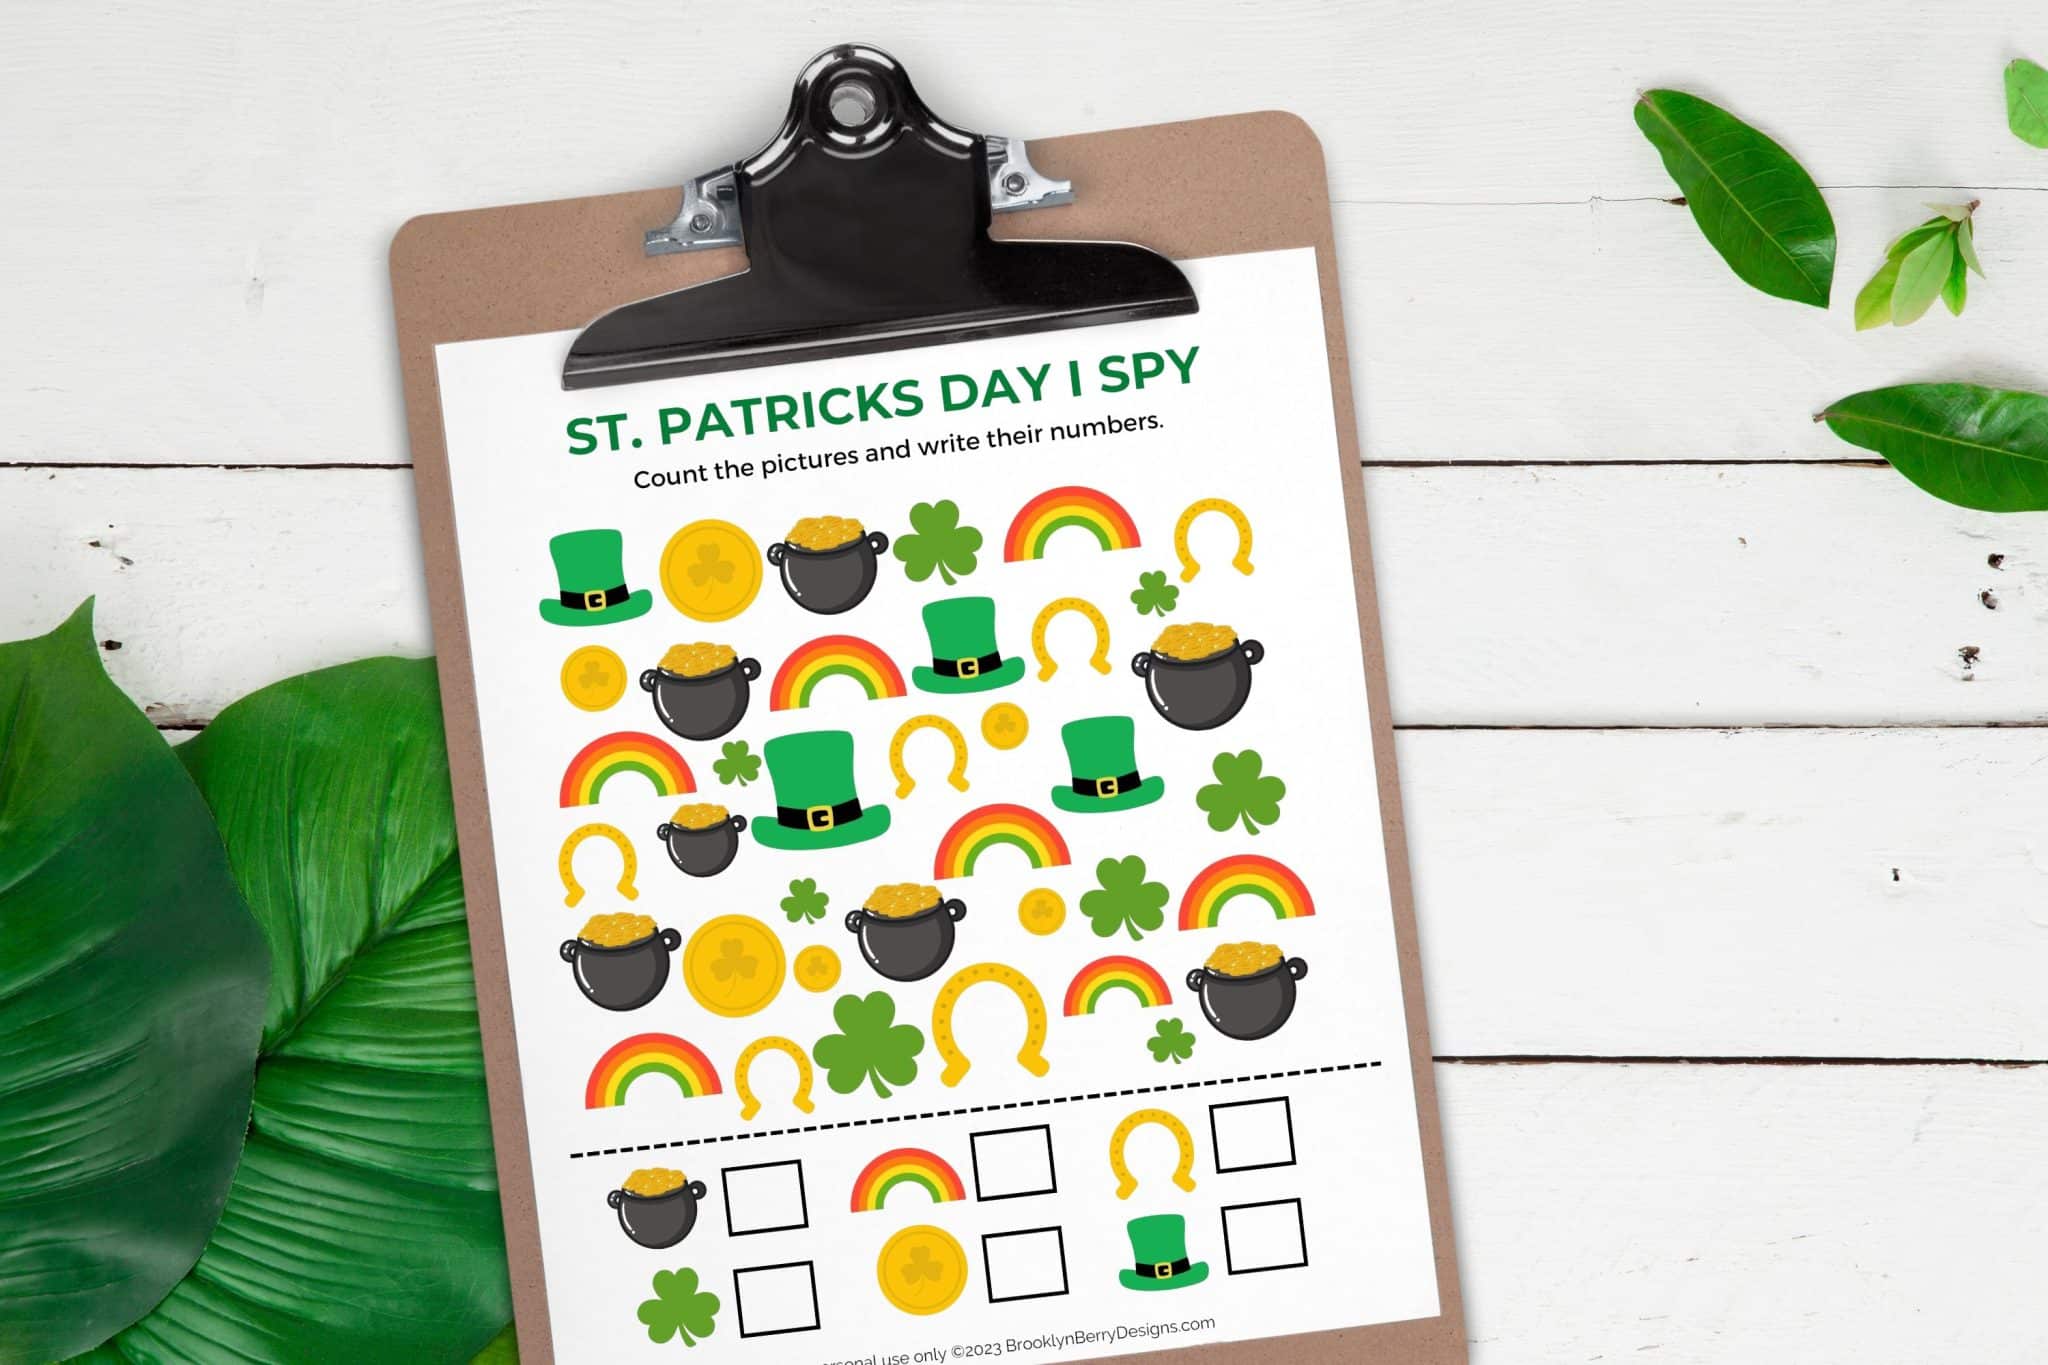 Wood background with a clipboard holding a st patricks day themed i spy game